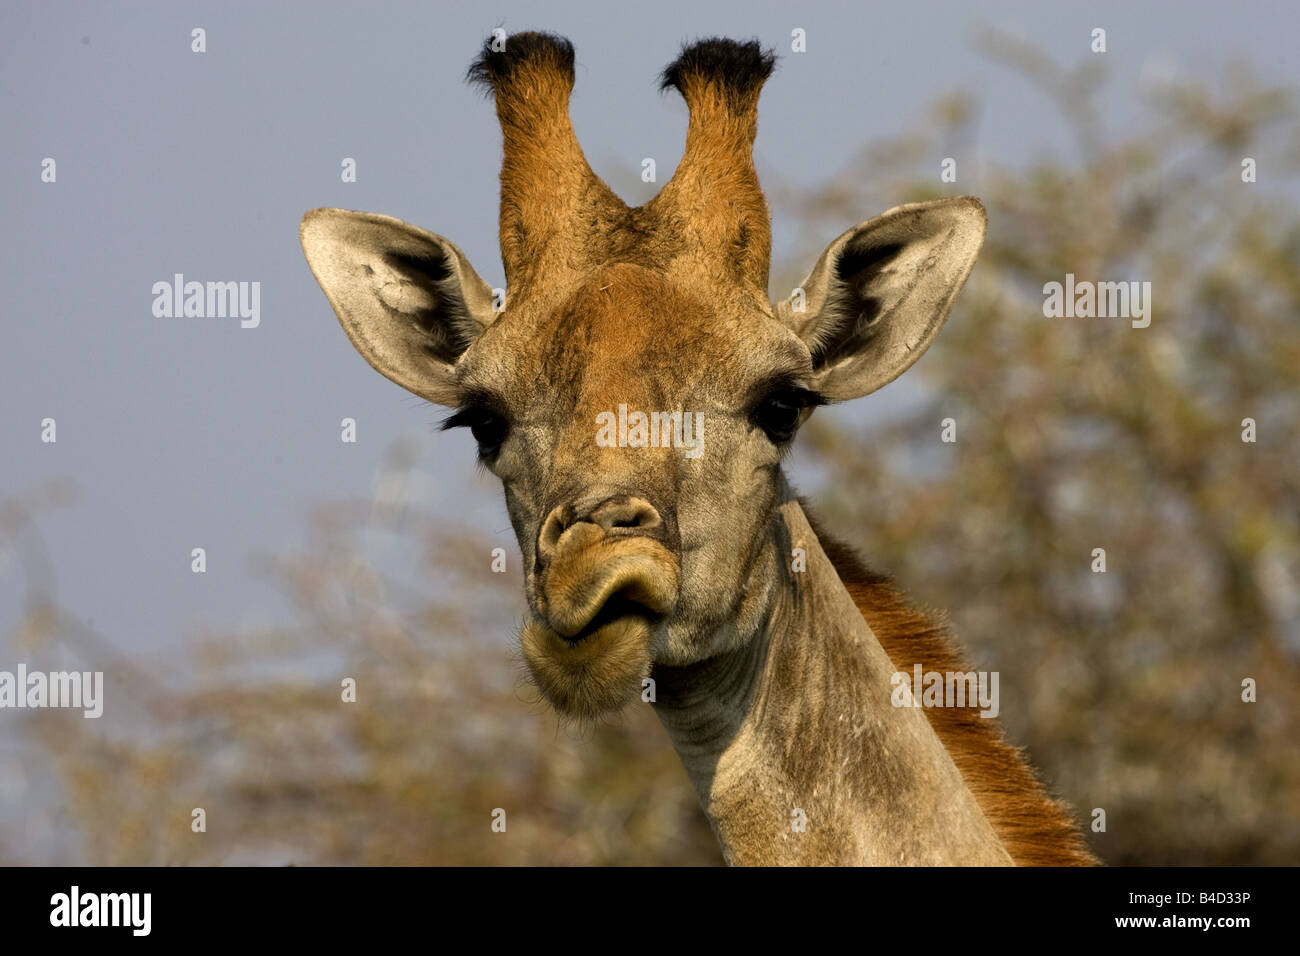 Giraffe chewing on leaves taken off tall trees in Namibia. Stock Photo